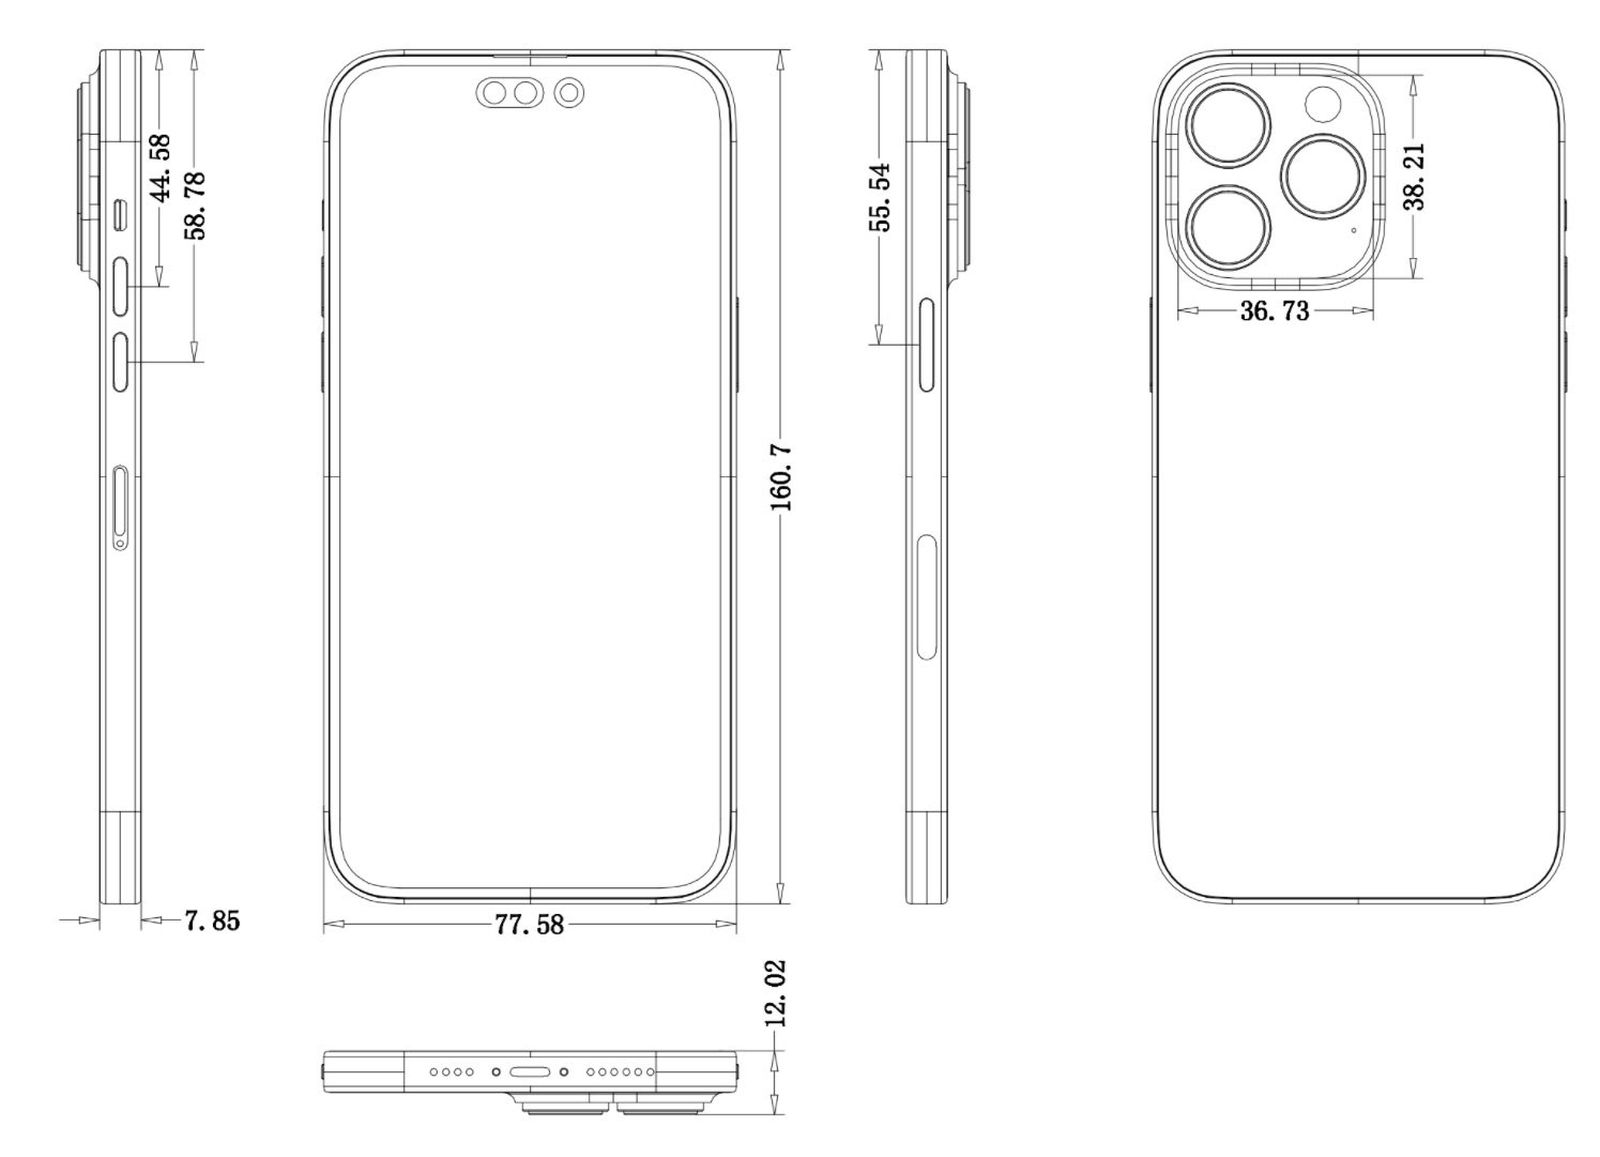 iPhone 14 Pro and iPhone 14 Pro Max Schematics Reveal Larger Camera